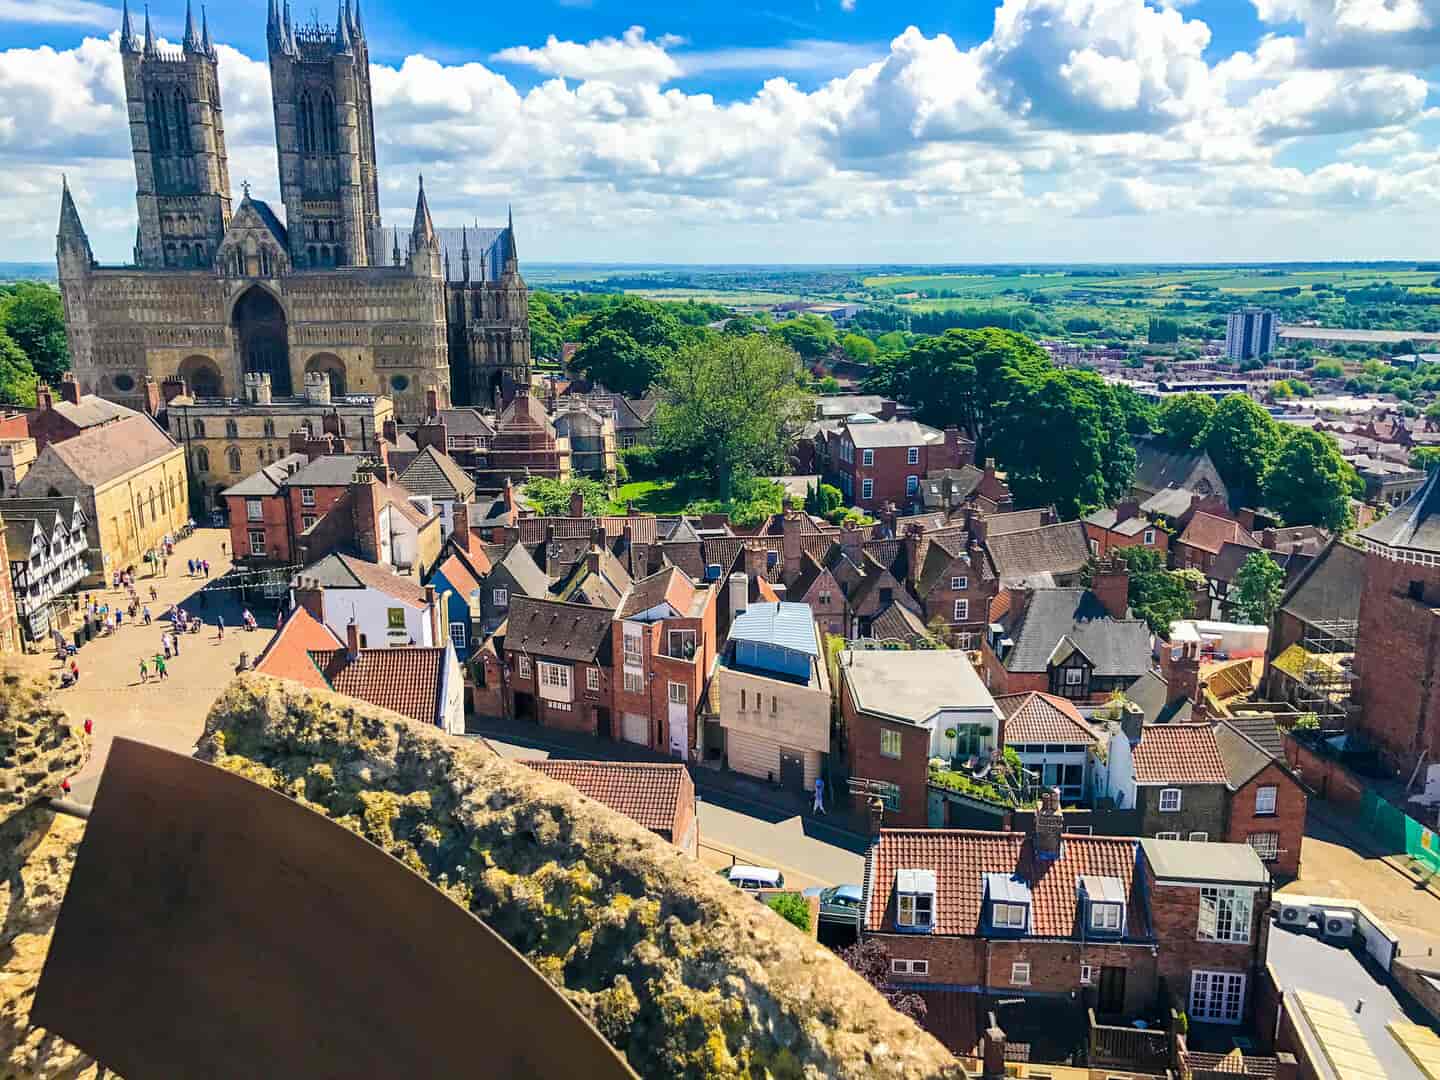 Student Accommodation in Lincoln - Rooftops and hills of Lincoln